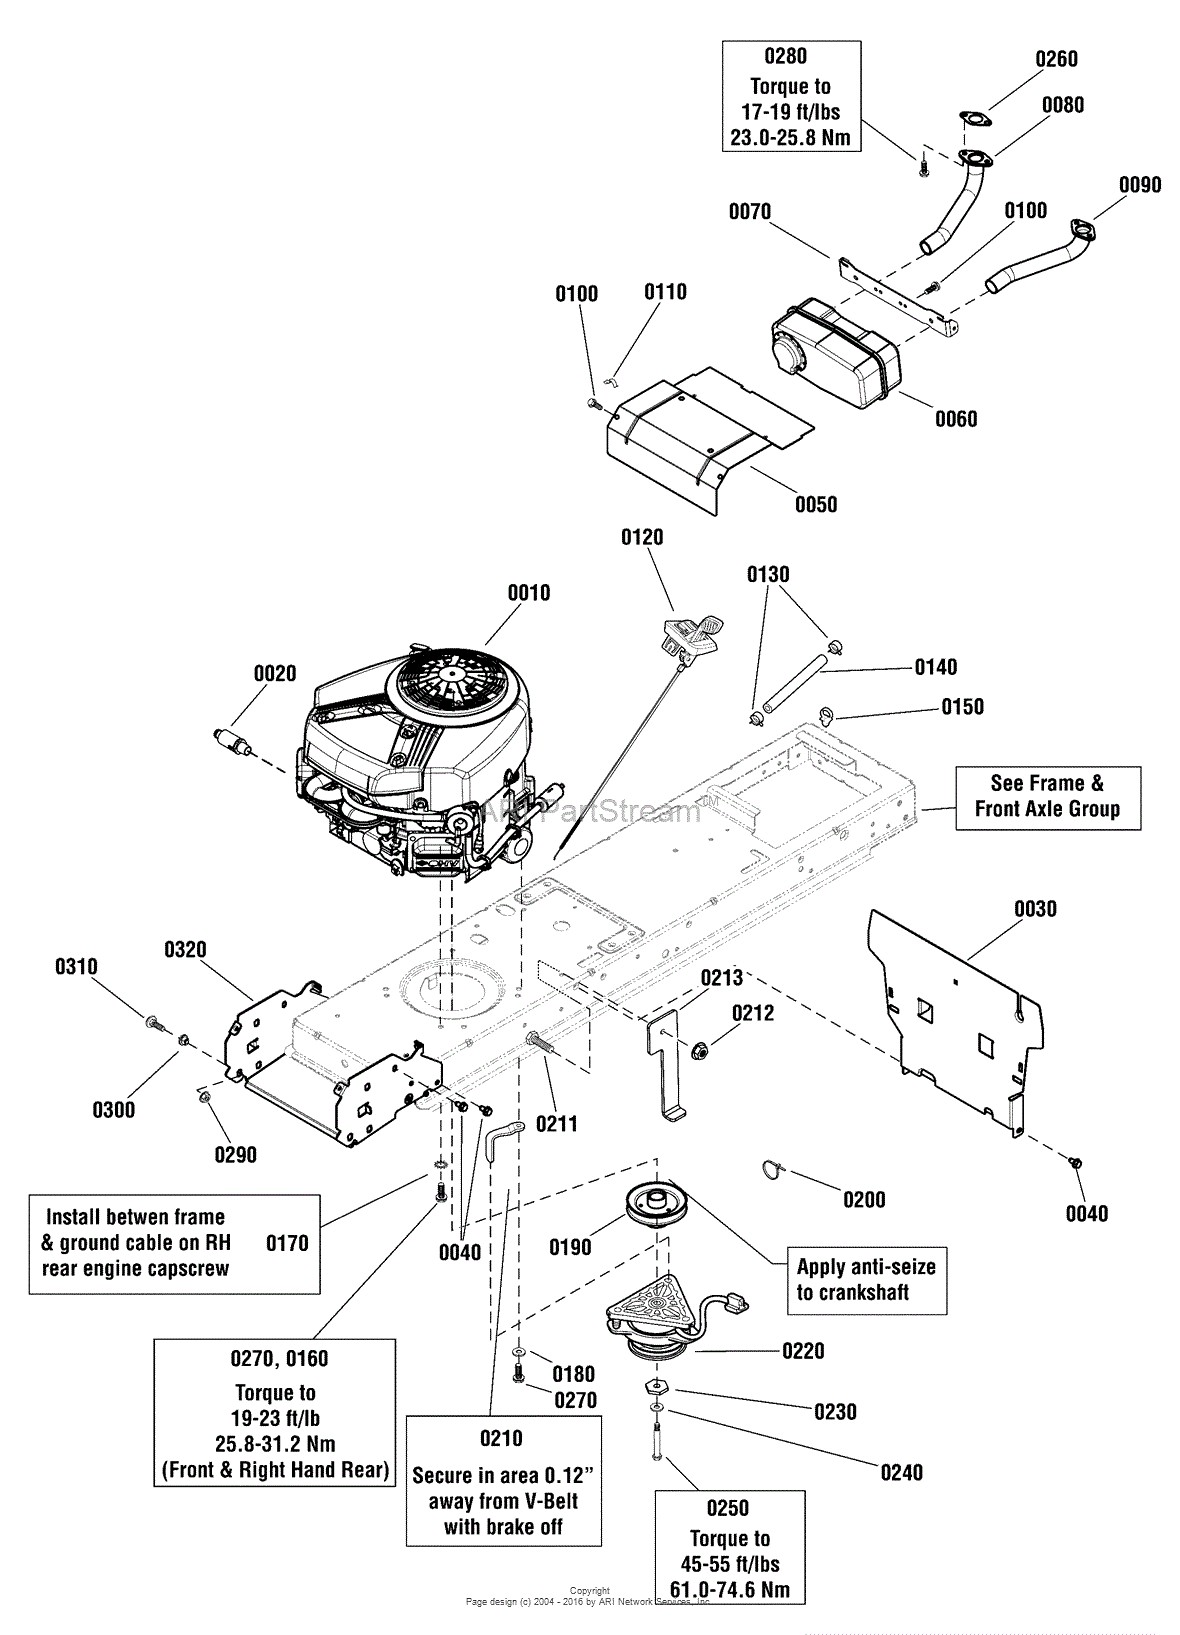 Parts Diagram for Briggs Stratton Engine Snapper 00 Spx2348 48" 122cm 23 Hp Spx Lawn Tractor 300 Of Parts Diagram for Briggs Stratton Engine